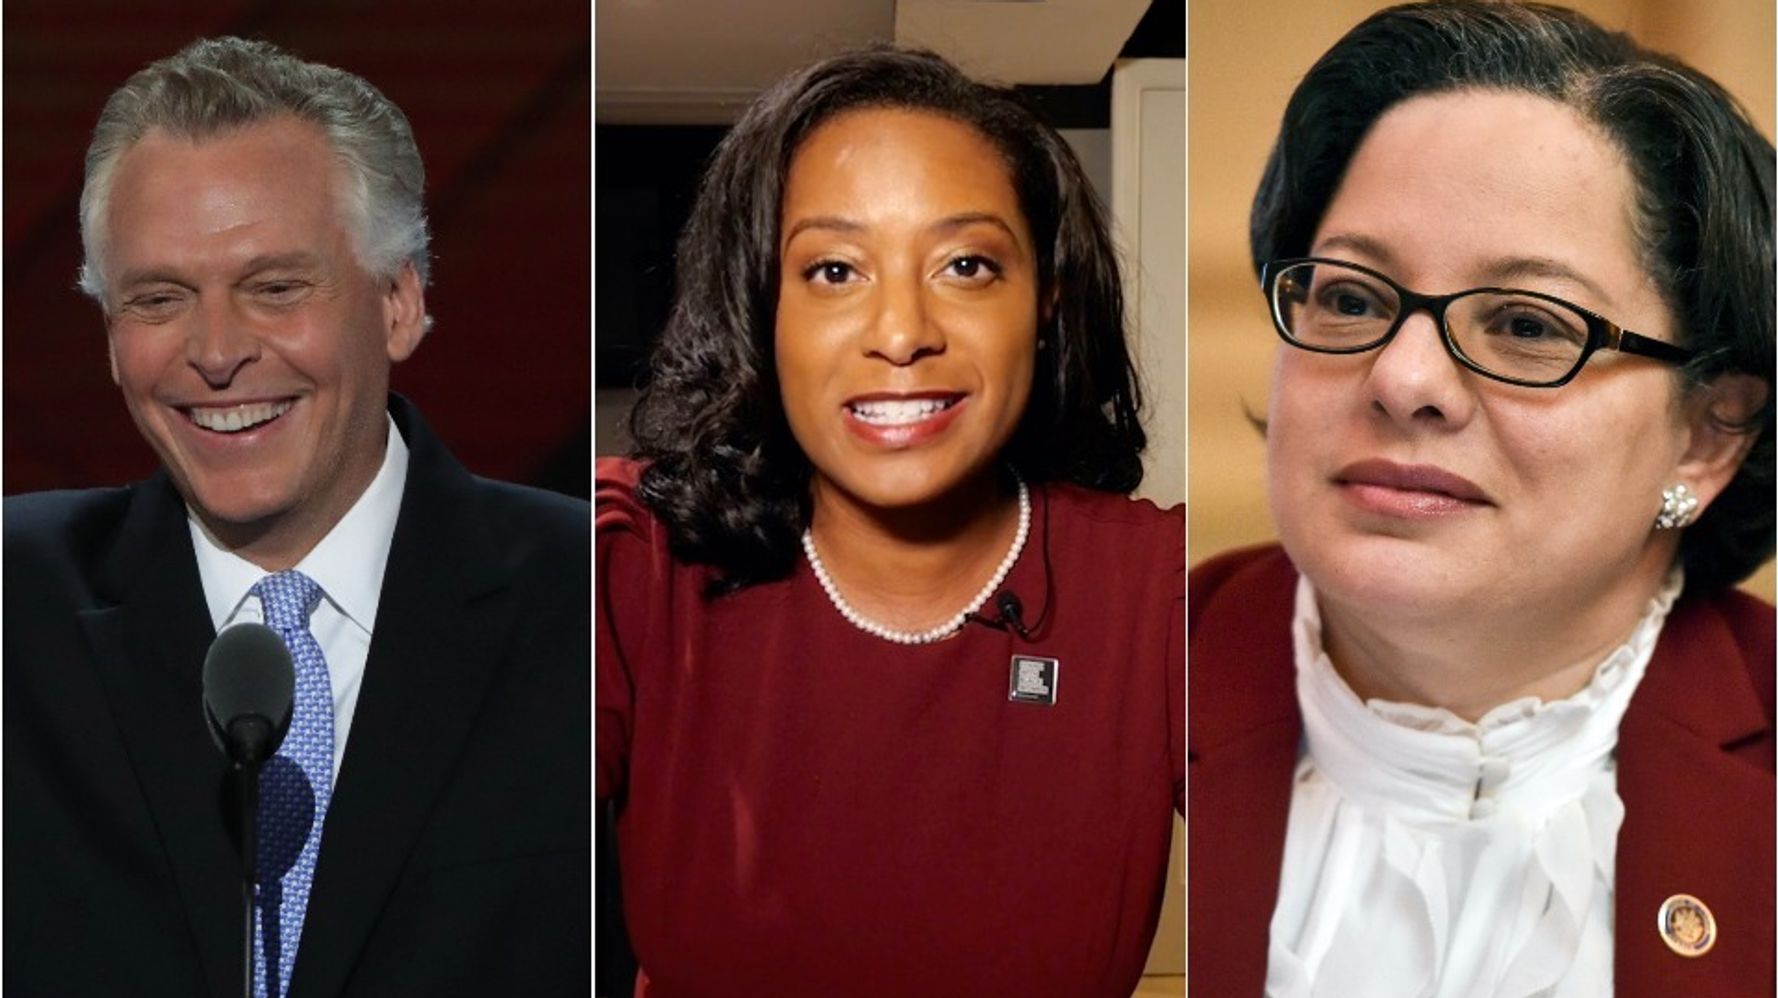 What To Watch For In Virginia’s Democratic Primaries